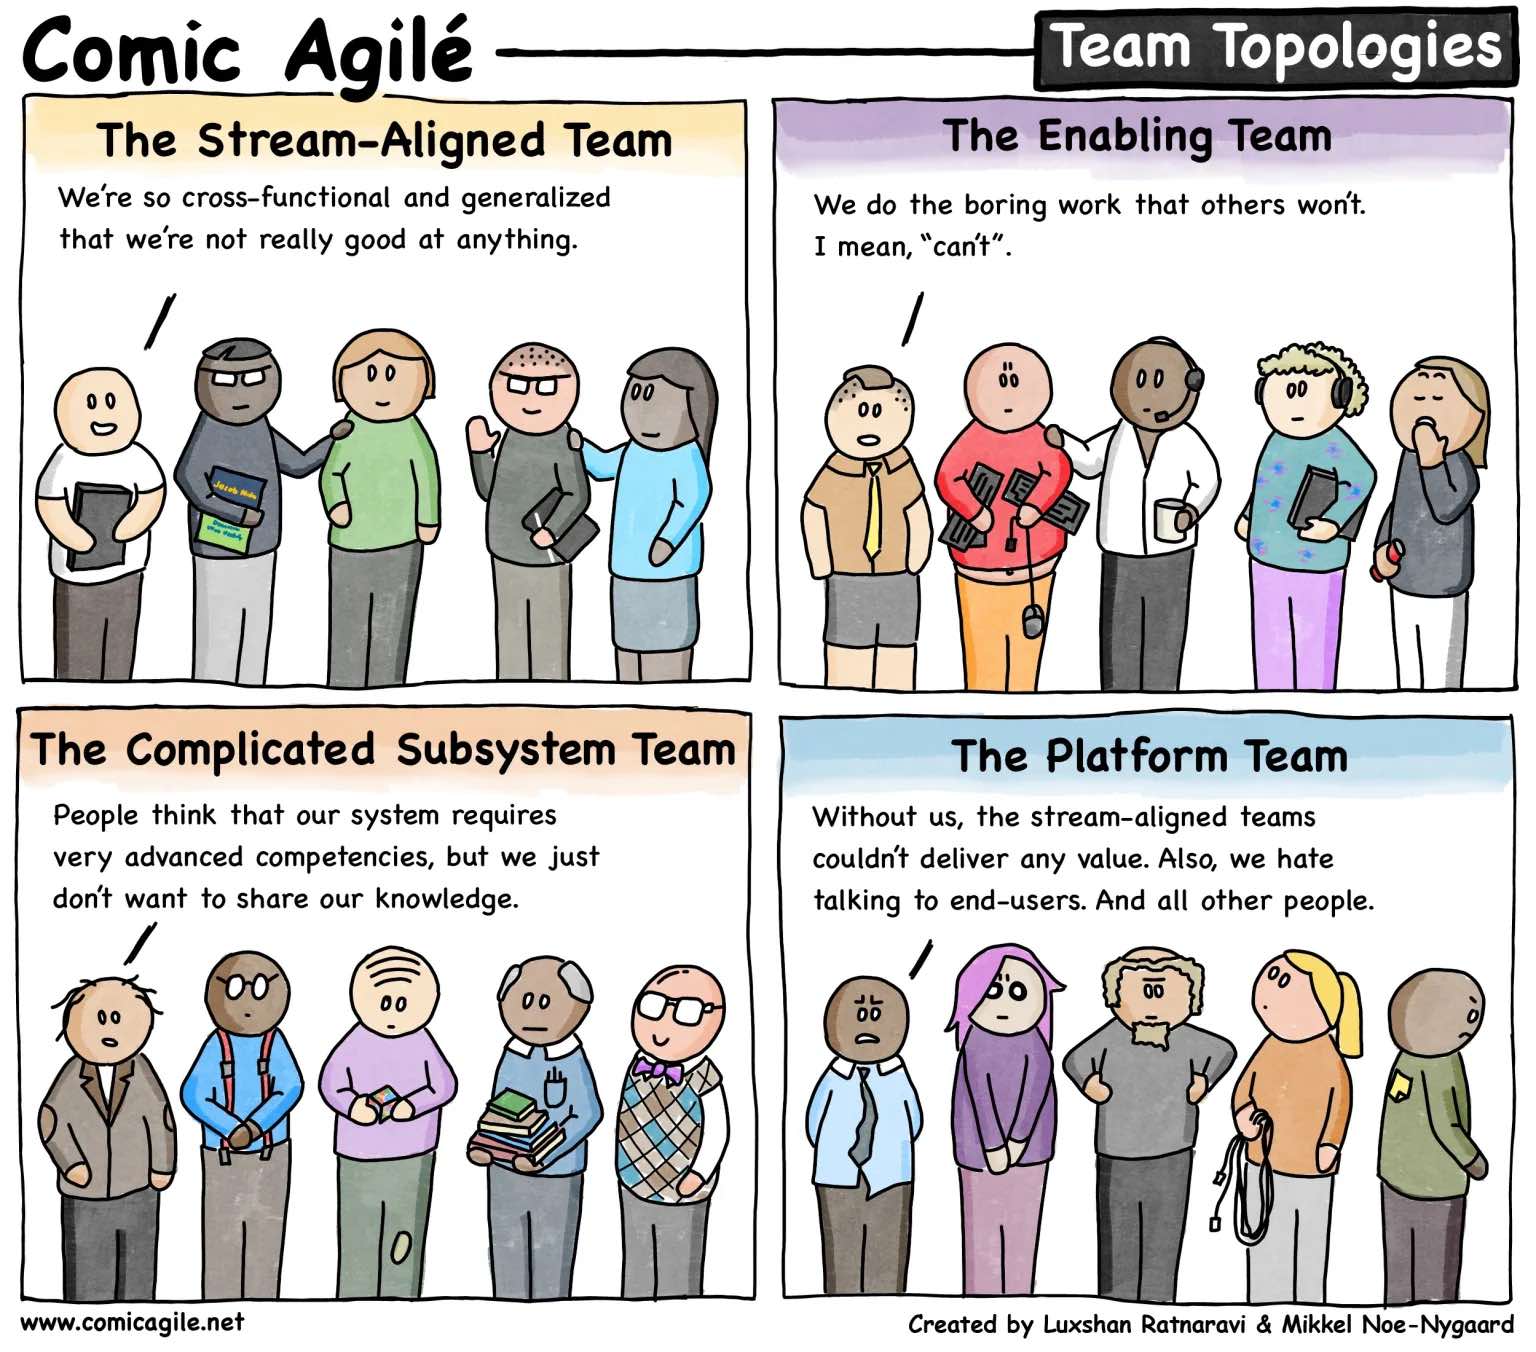 Comic Agile - Team Topologies - Cynical spin on the 4 Team Types